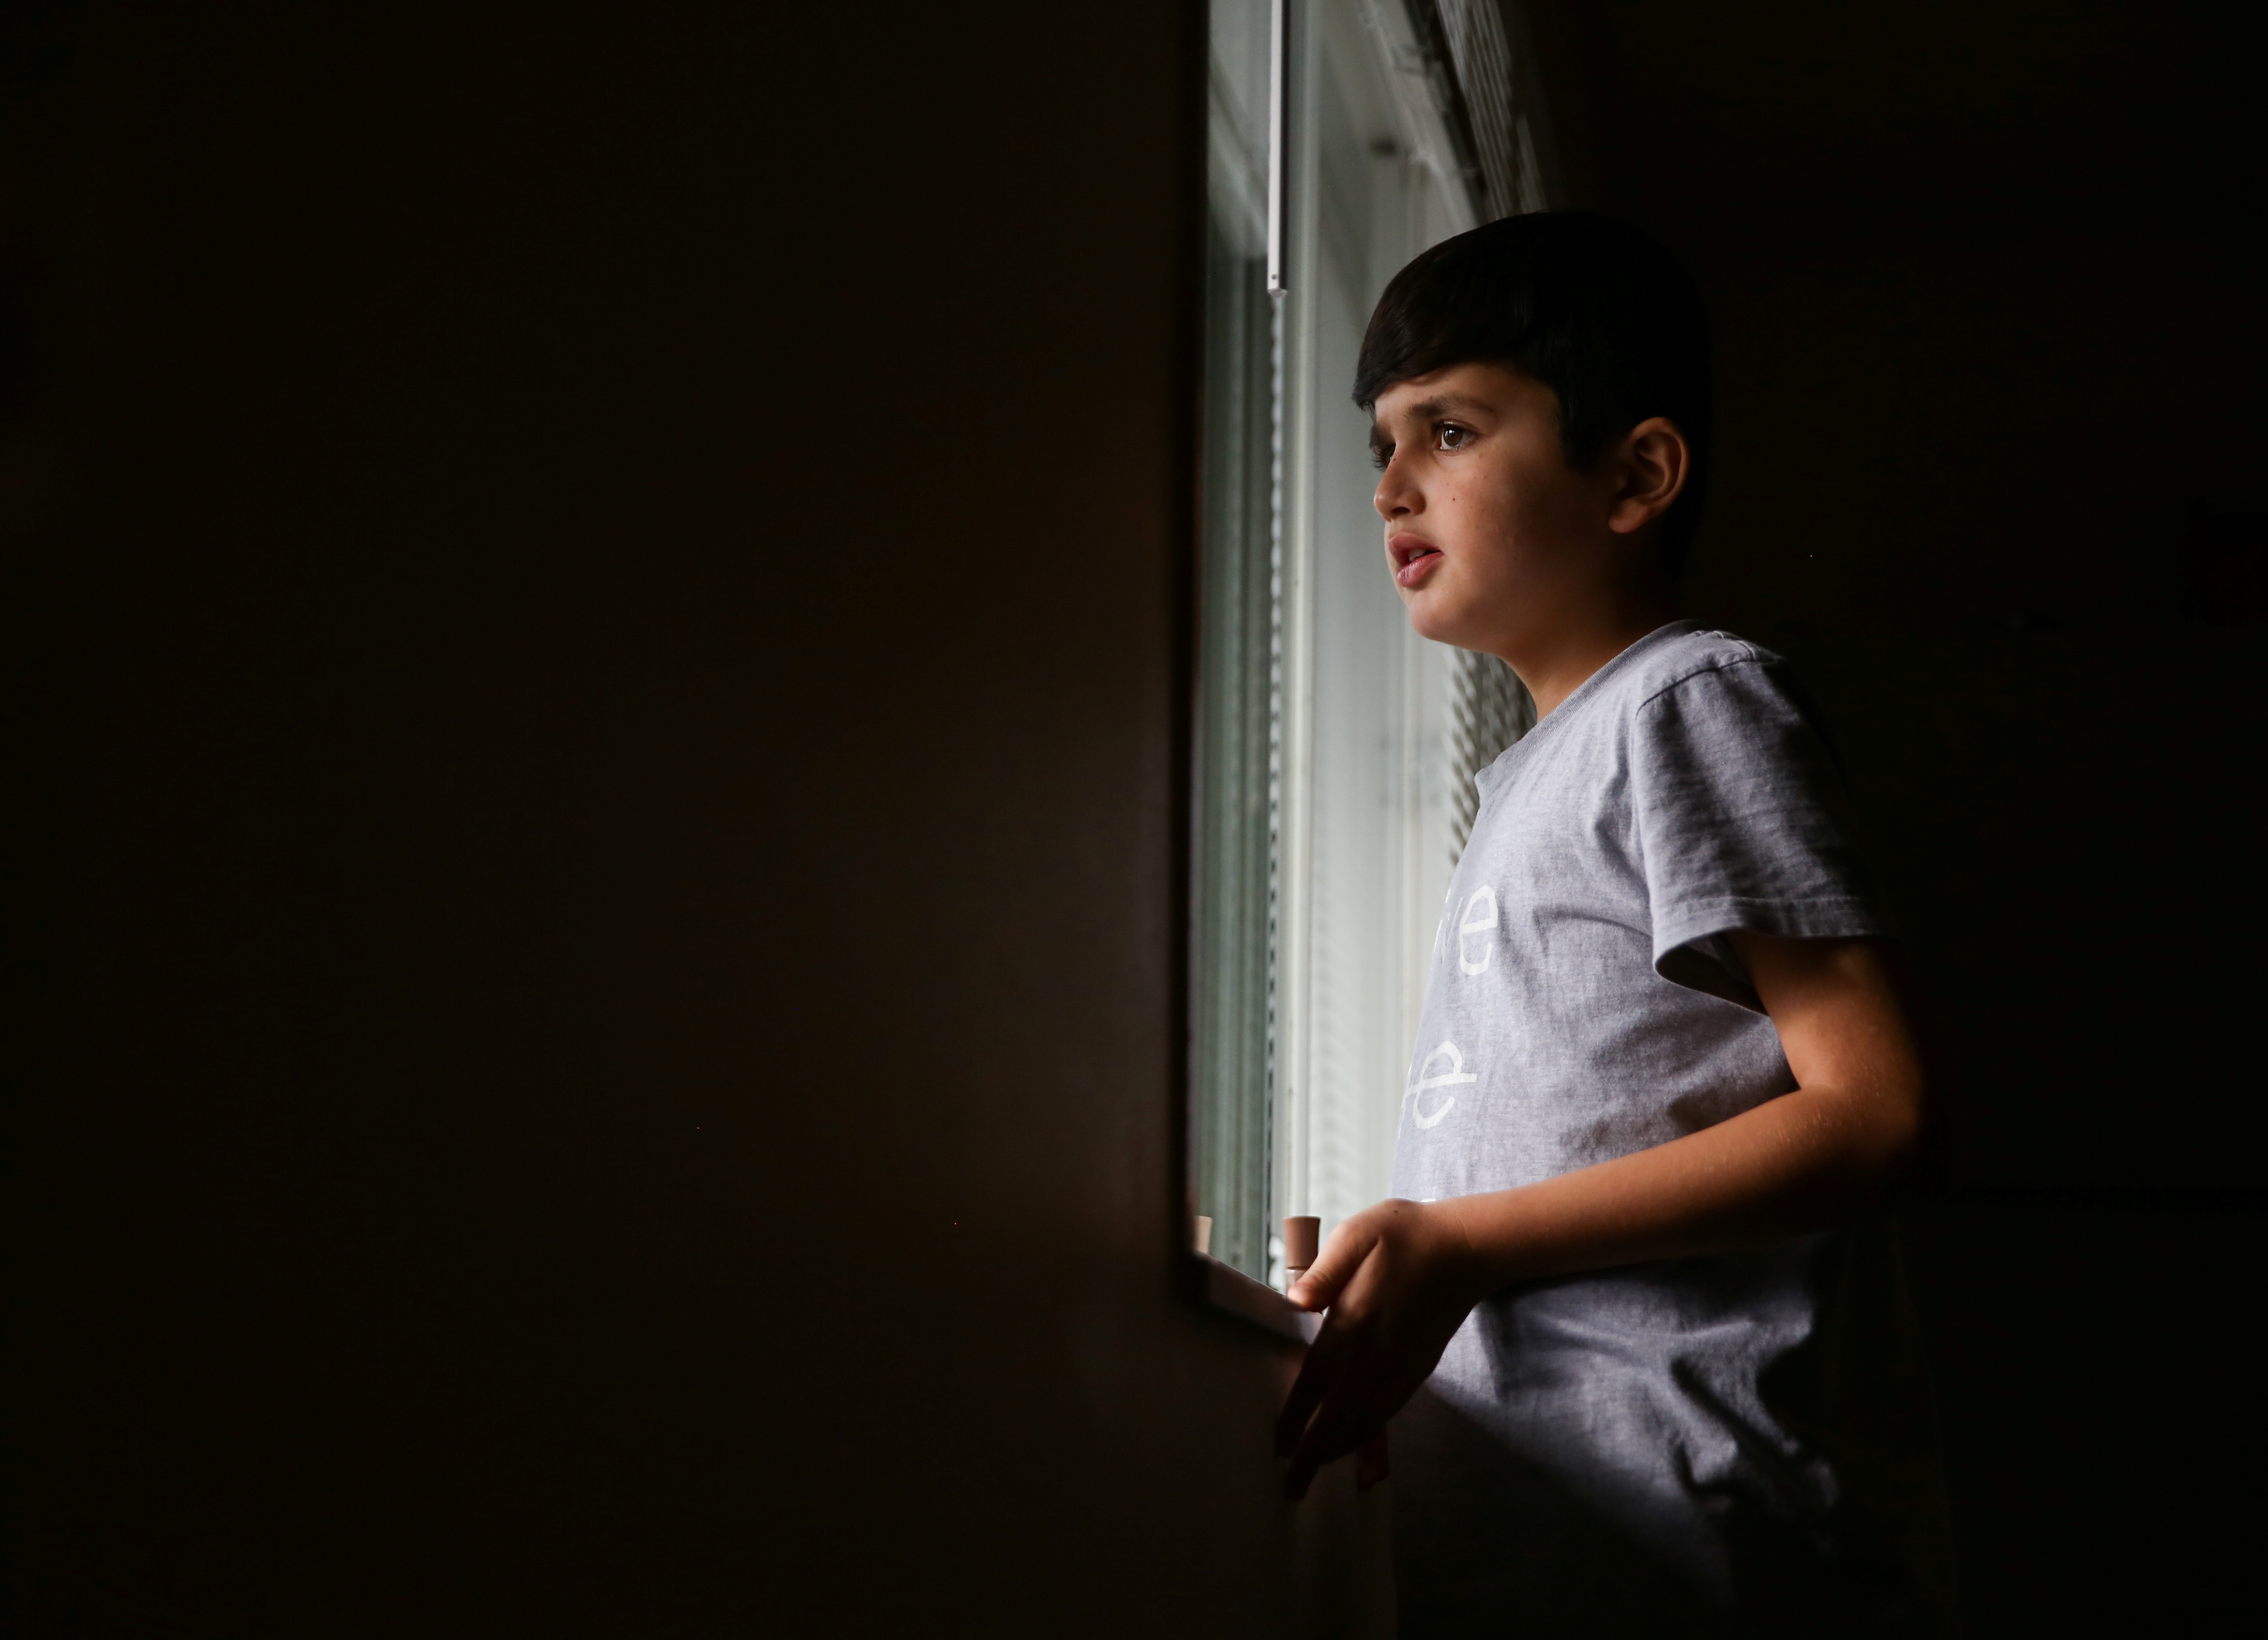 Afghan children evacuated alone, face uncertainty in the United States